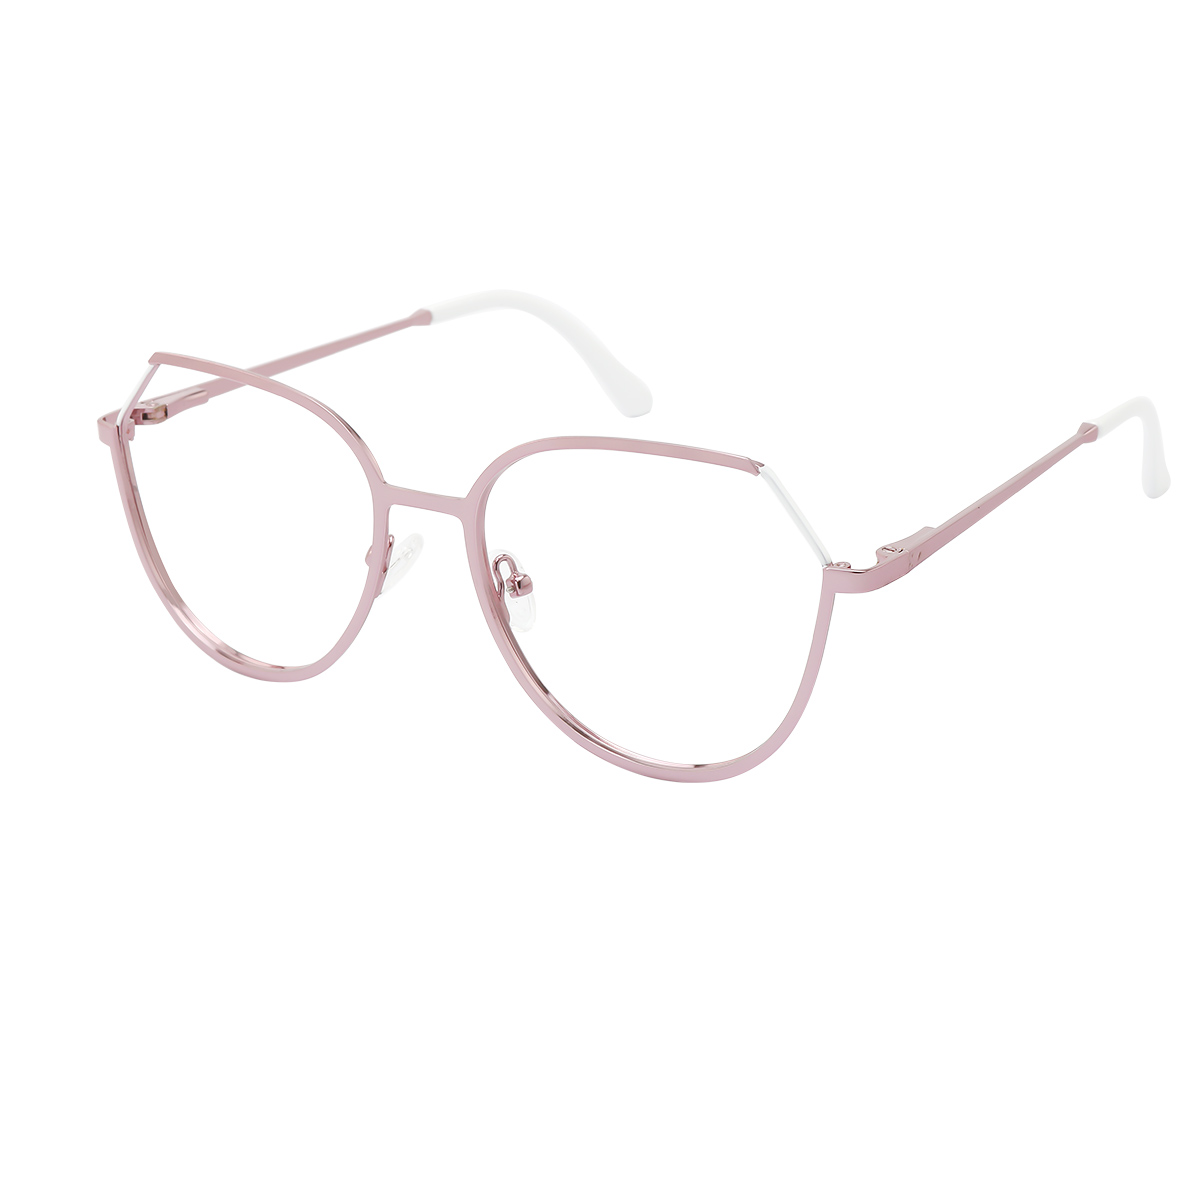 Persis - Geometric Pink/White Reading Glasses for Women